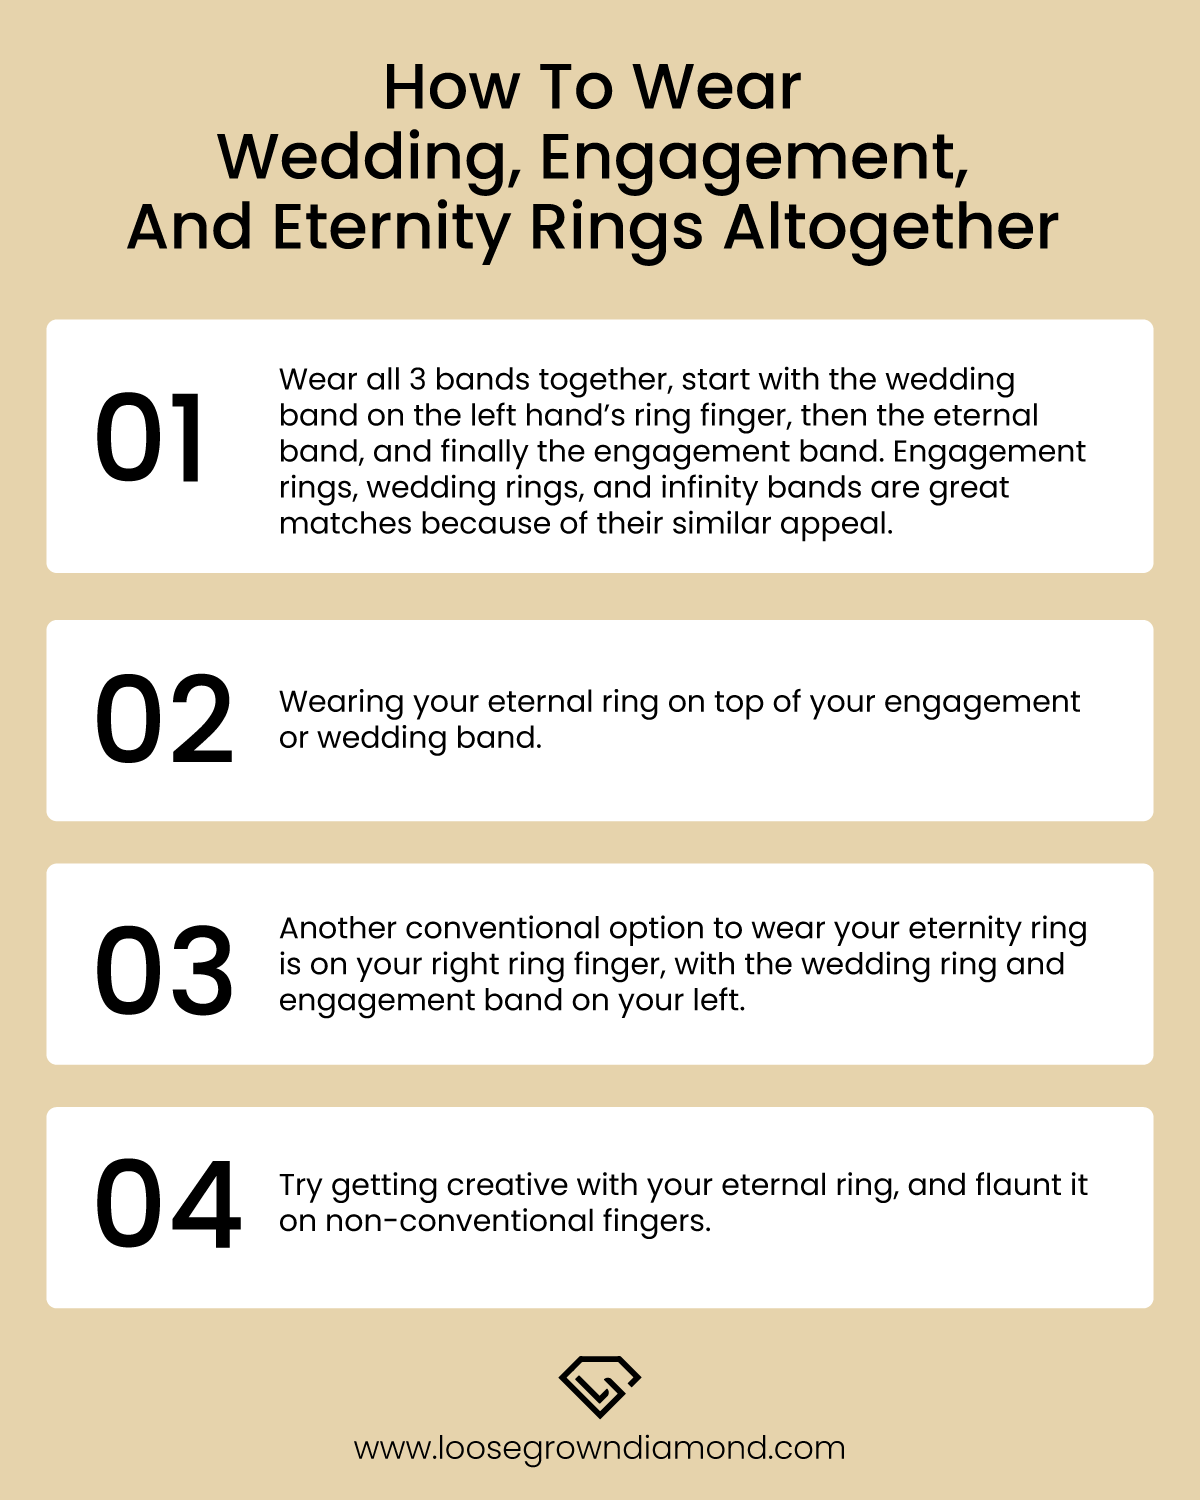 How To Wear Wedding, Engagement, And Eternity Rings Altogether